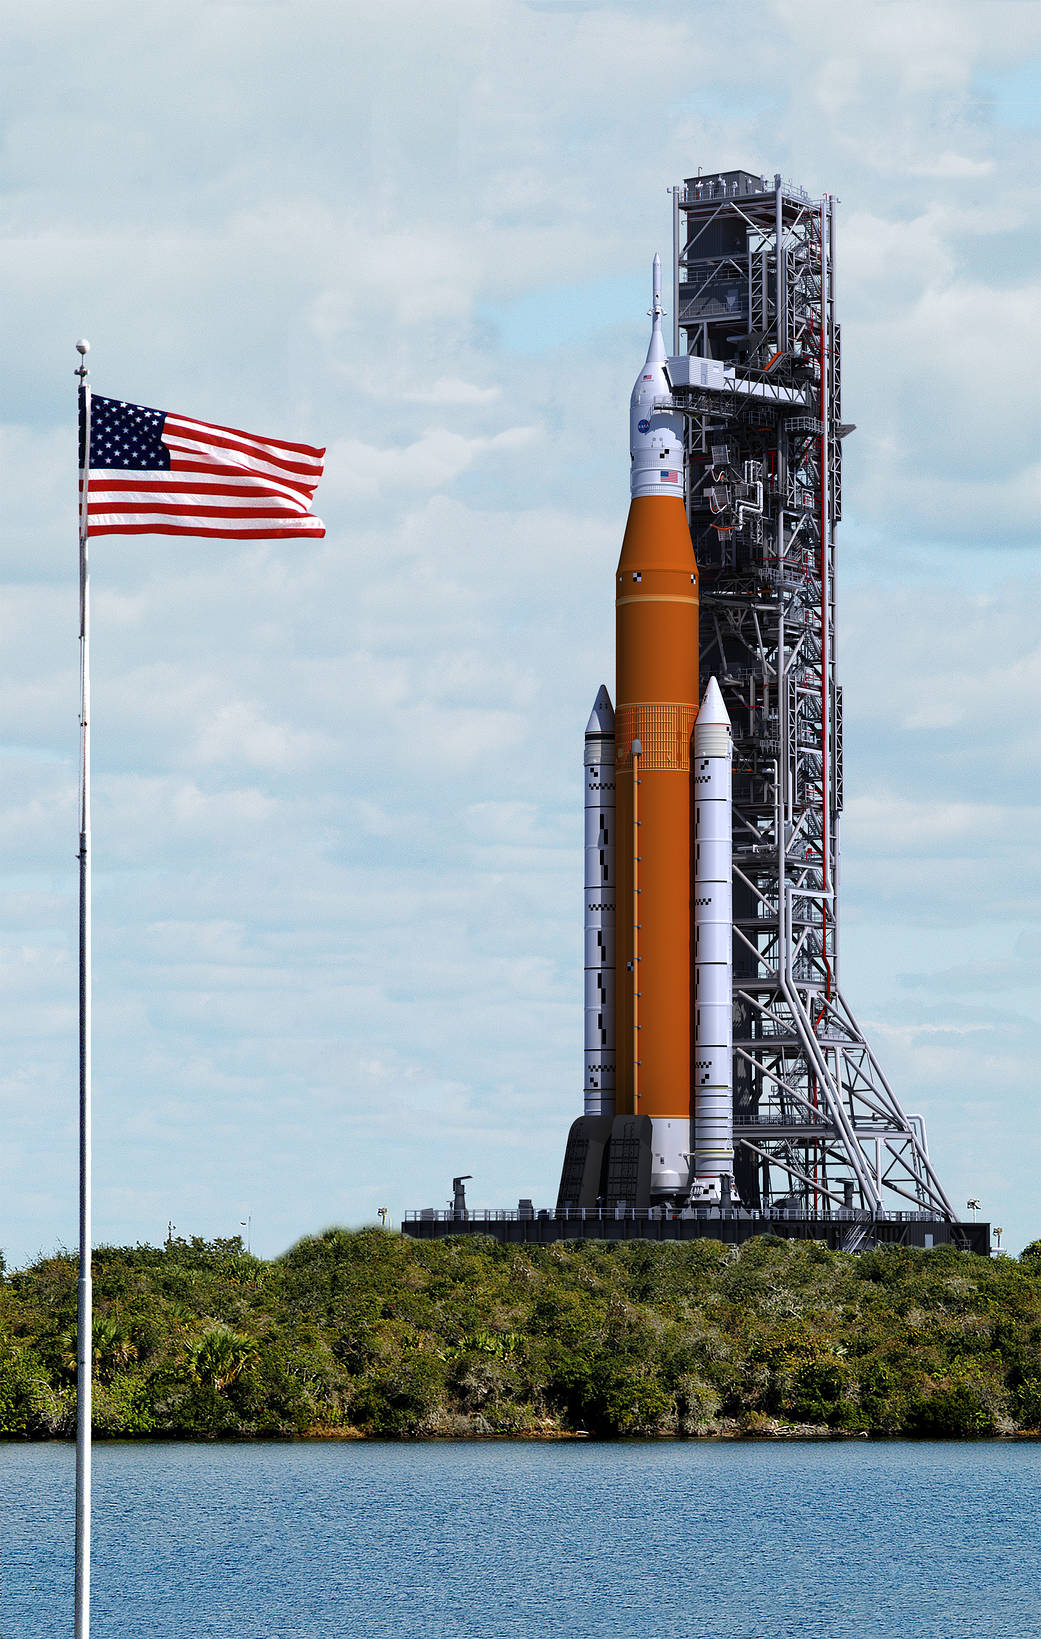 Artist concept of NASA's Space Launch System (SLS) on the launchpad